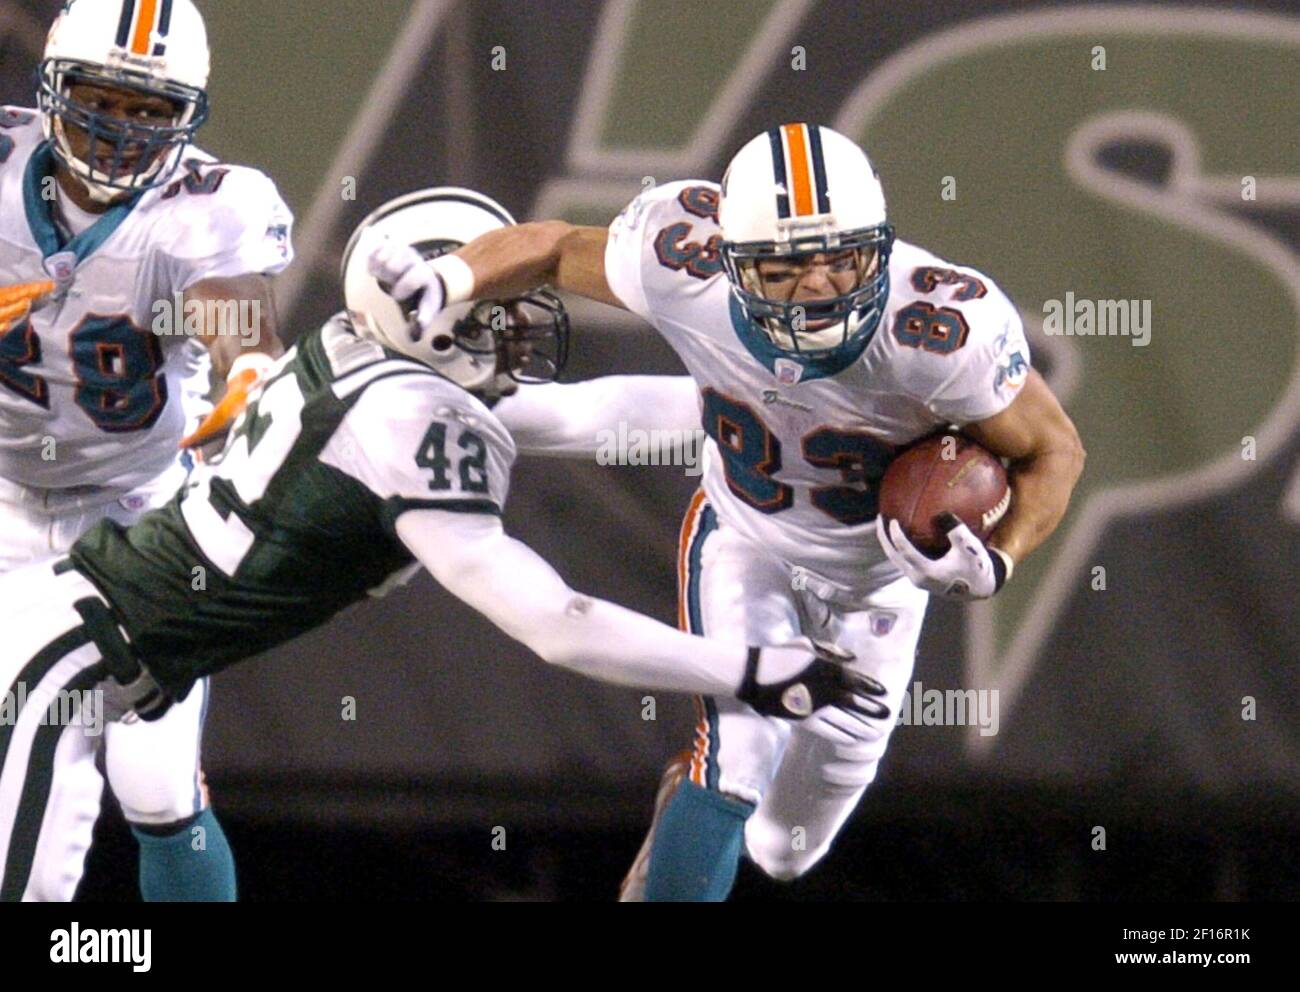 Miami Dolphins wide receiver Wes Welker (83) of the Dolphins tries to slip  the grasp of the New York Jets' Rashad Washington in the fourth quarter.  The Jets defeated the Dolphins, 20-17,